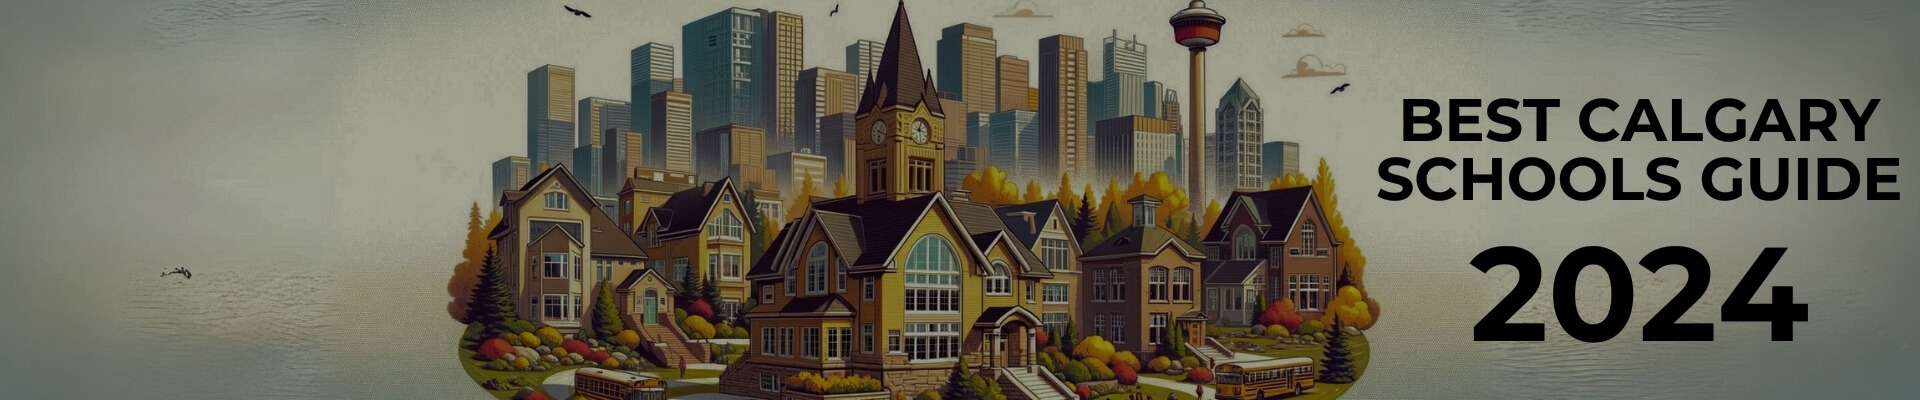 Best Calgary schools. Learn about top rated schools and how their rankings influence home buyers.